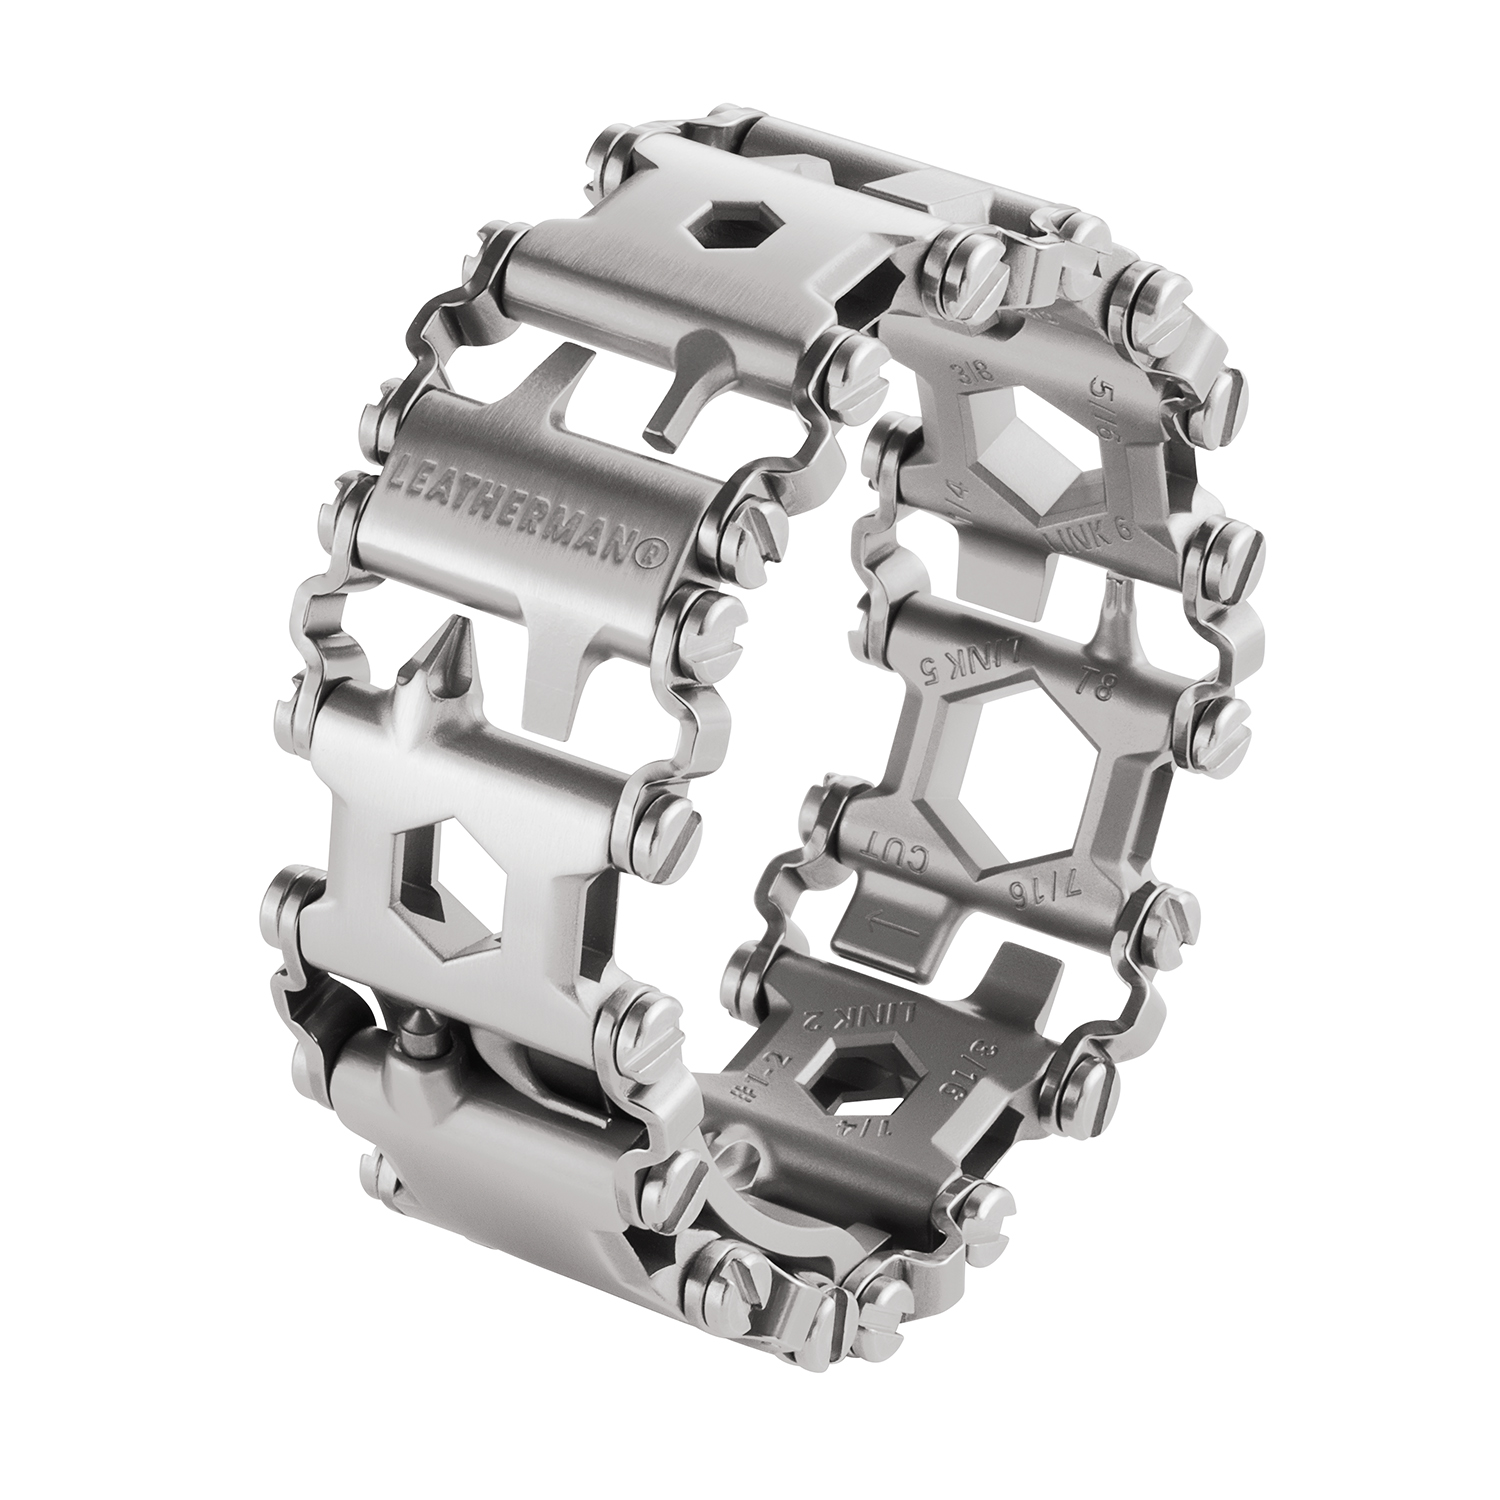 Generic 31 In 1 Multifunction Tool Outdoor Bracelet Hiking Stainless Silver  @ Best Price Online | Jumia Egypt